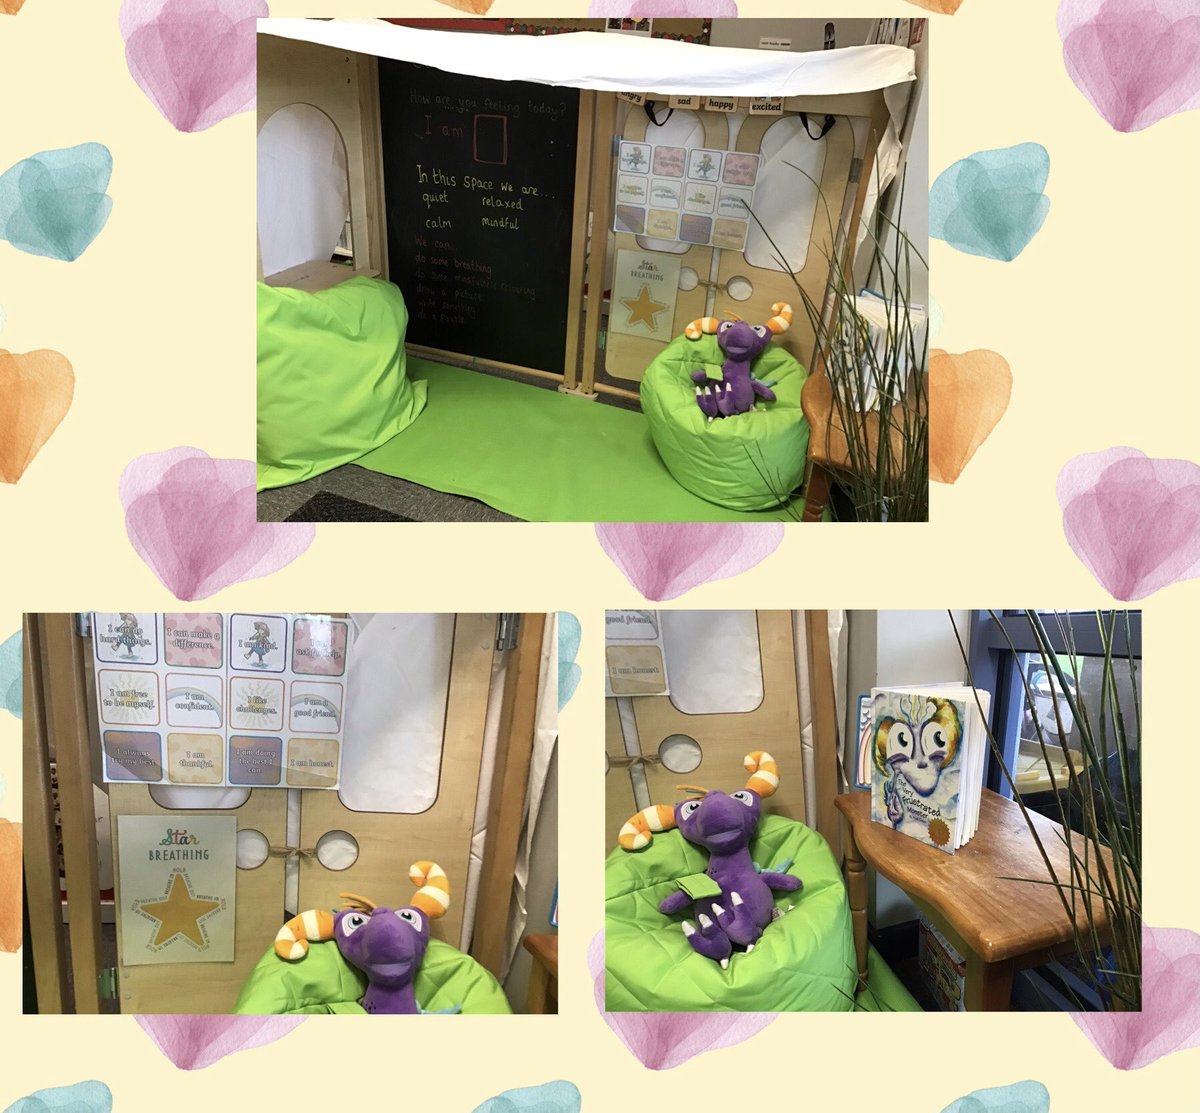 Today we have read all about ‘Twitch - The very frustrated monster”⁦@WorryWoos⁩. This afternoon we set up a mindfulness area in our classroom. ⁦@PoppyfieldSch⁩ ⁦@MrsBytheway⁩